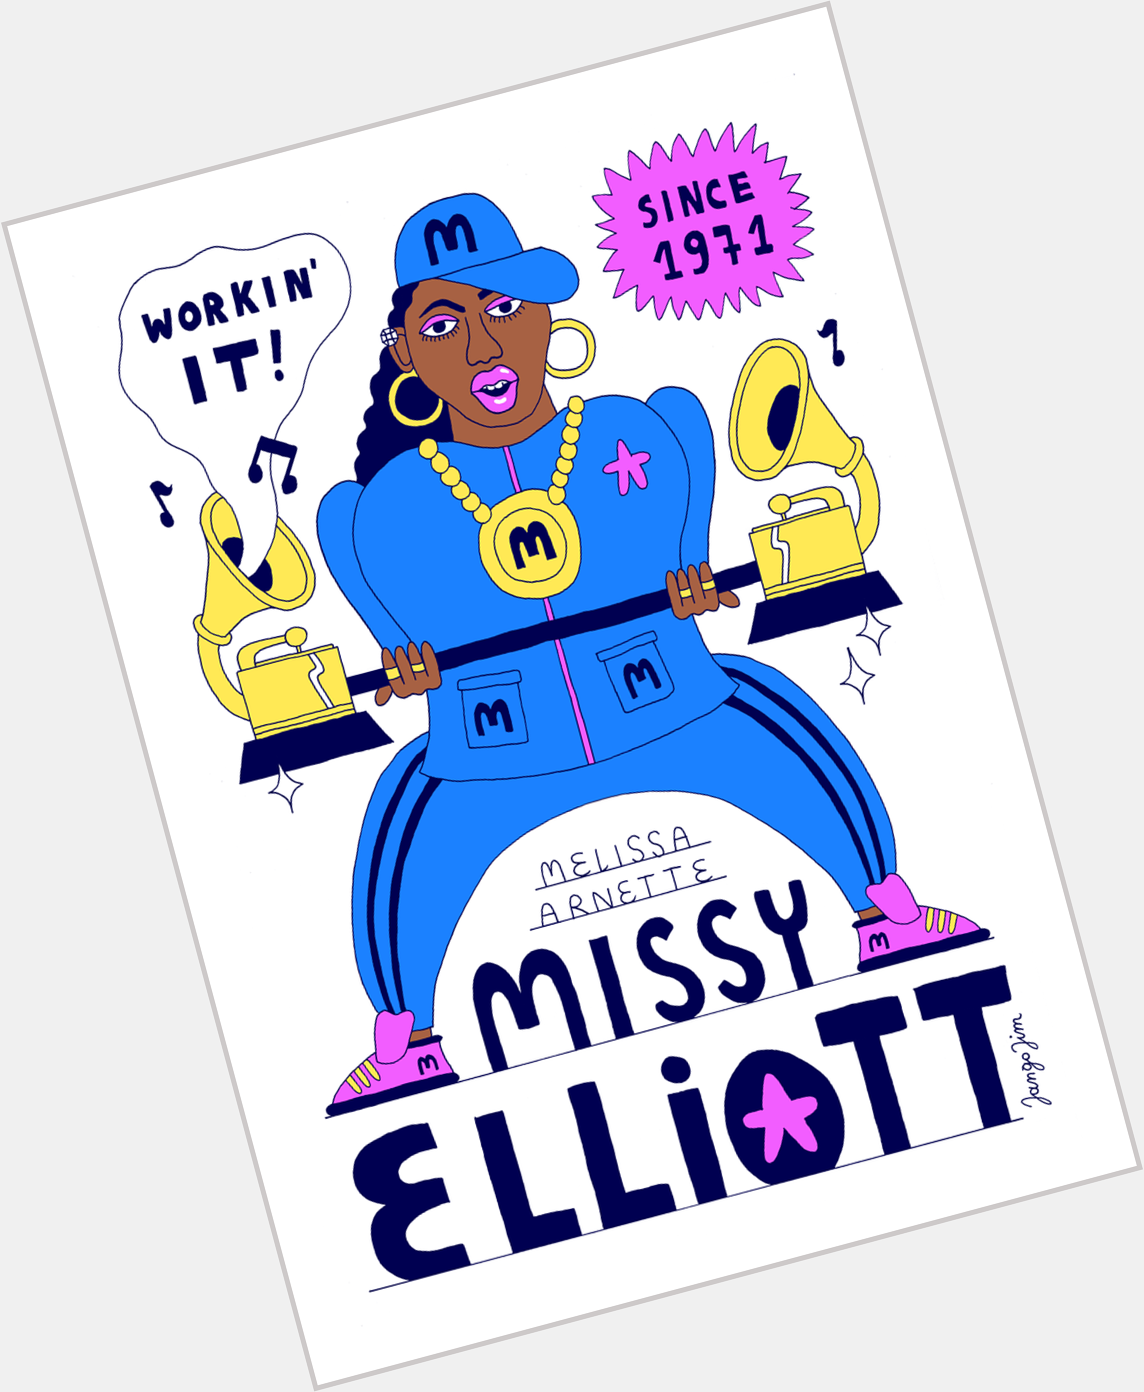 Already posted it, but here\s my Missy Elliott tribute illustration. Happy awesome Birthday, !! 